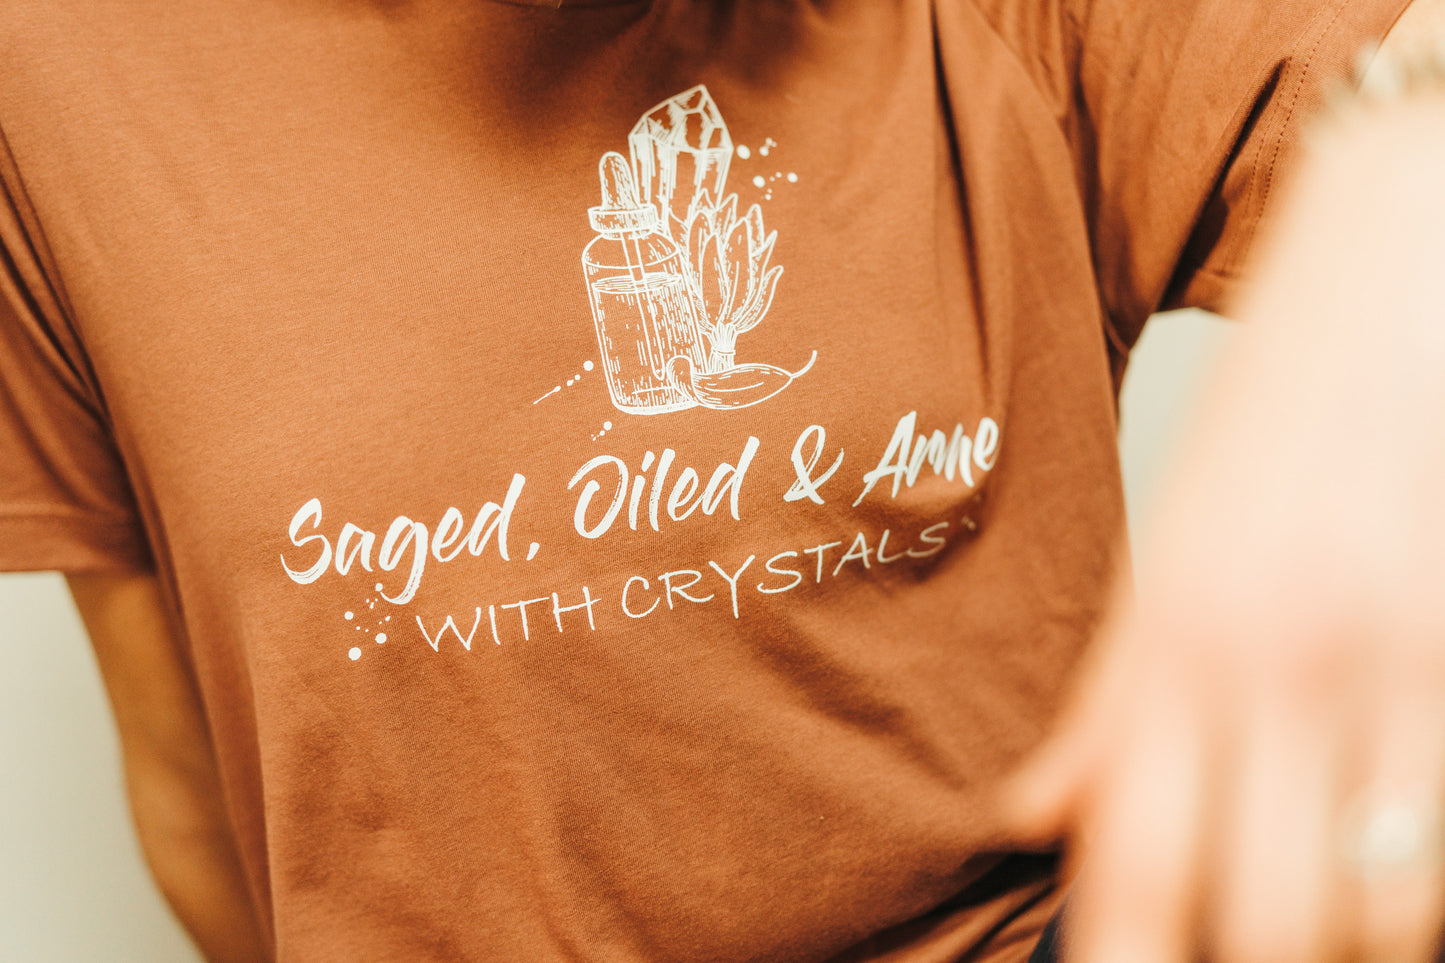 Saged, Oiled & Armed with Crystals Tee - Unisex